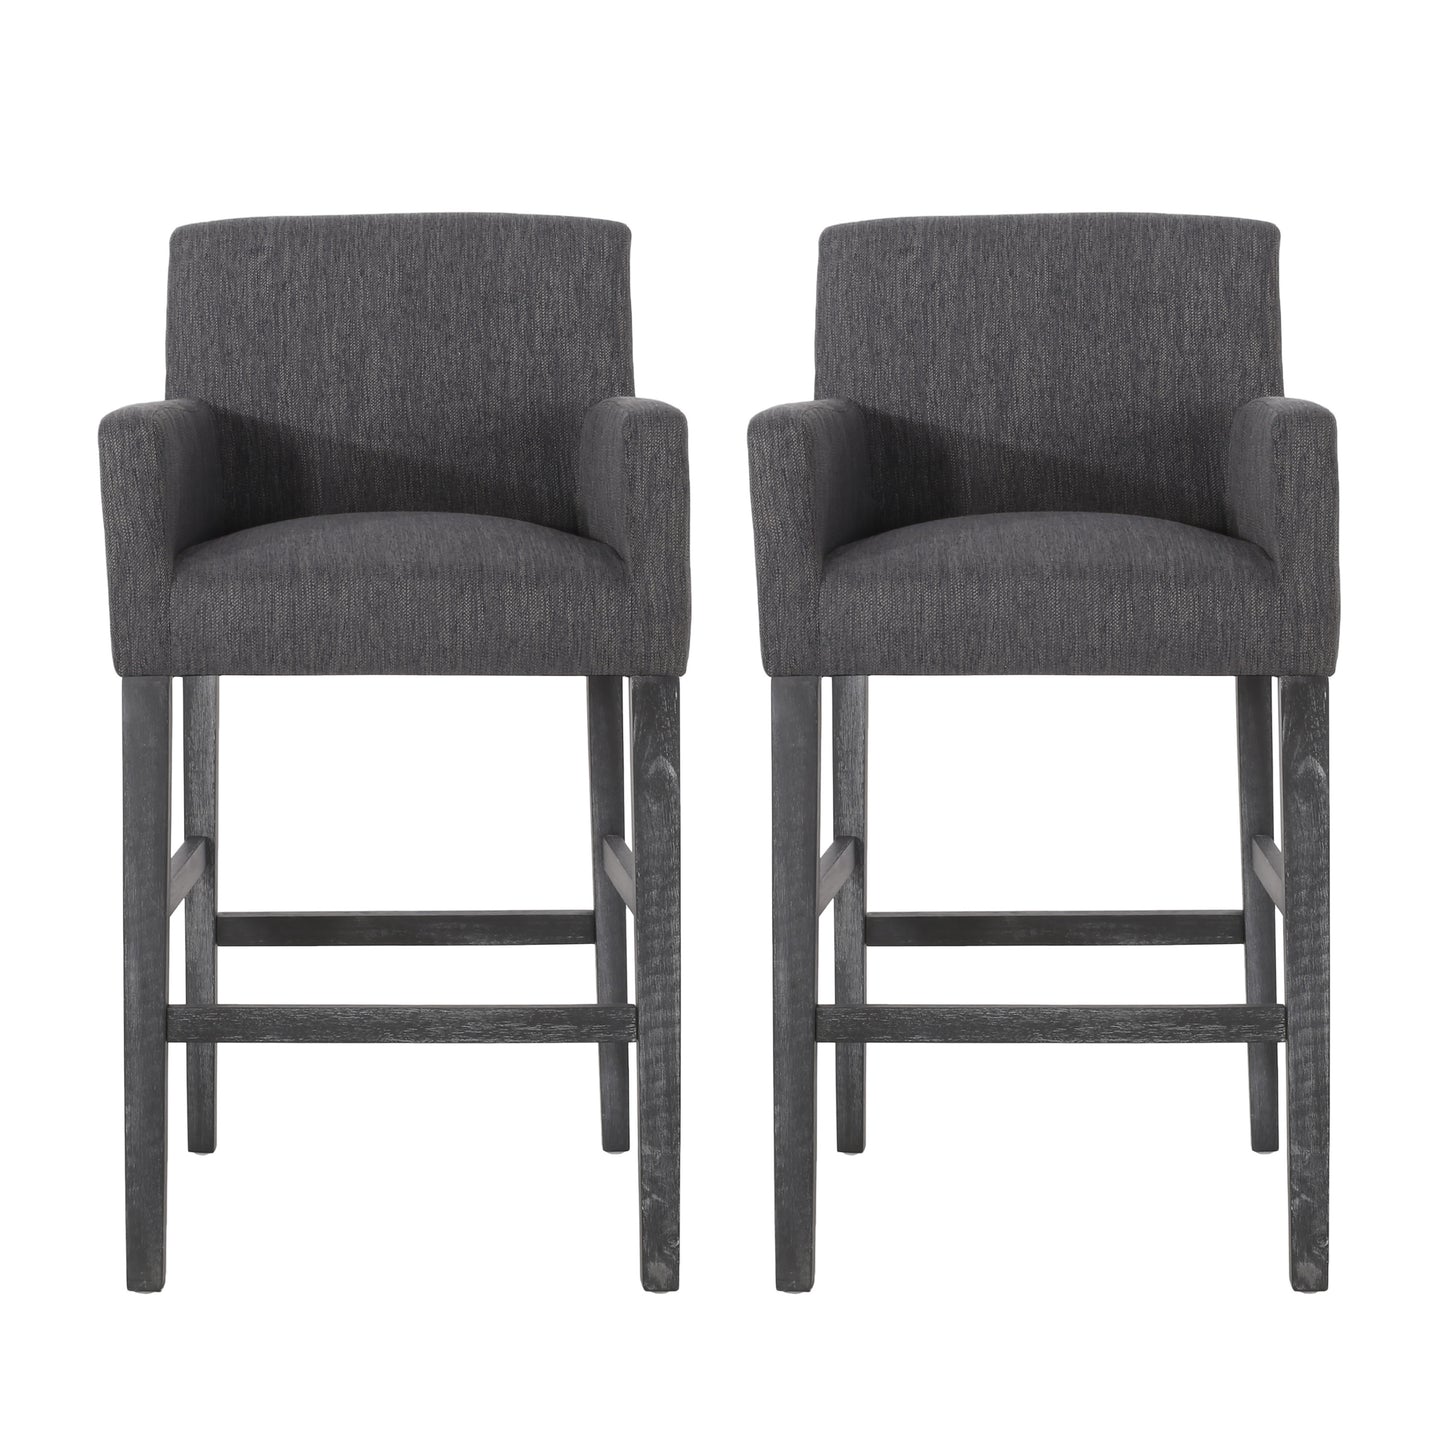 Chaparral Contemporary Fabric Upholstered Wood 30.5 inch Barstools (Set of 2)